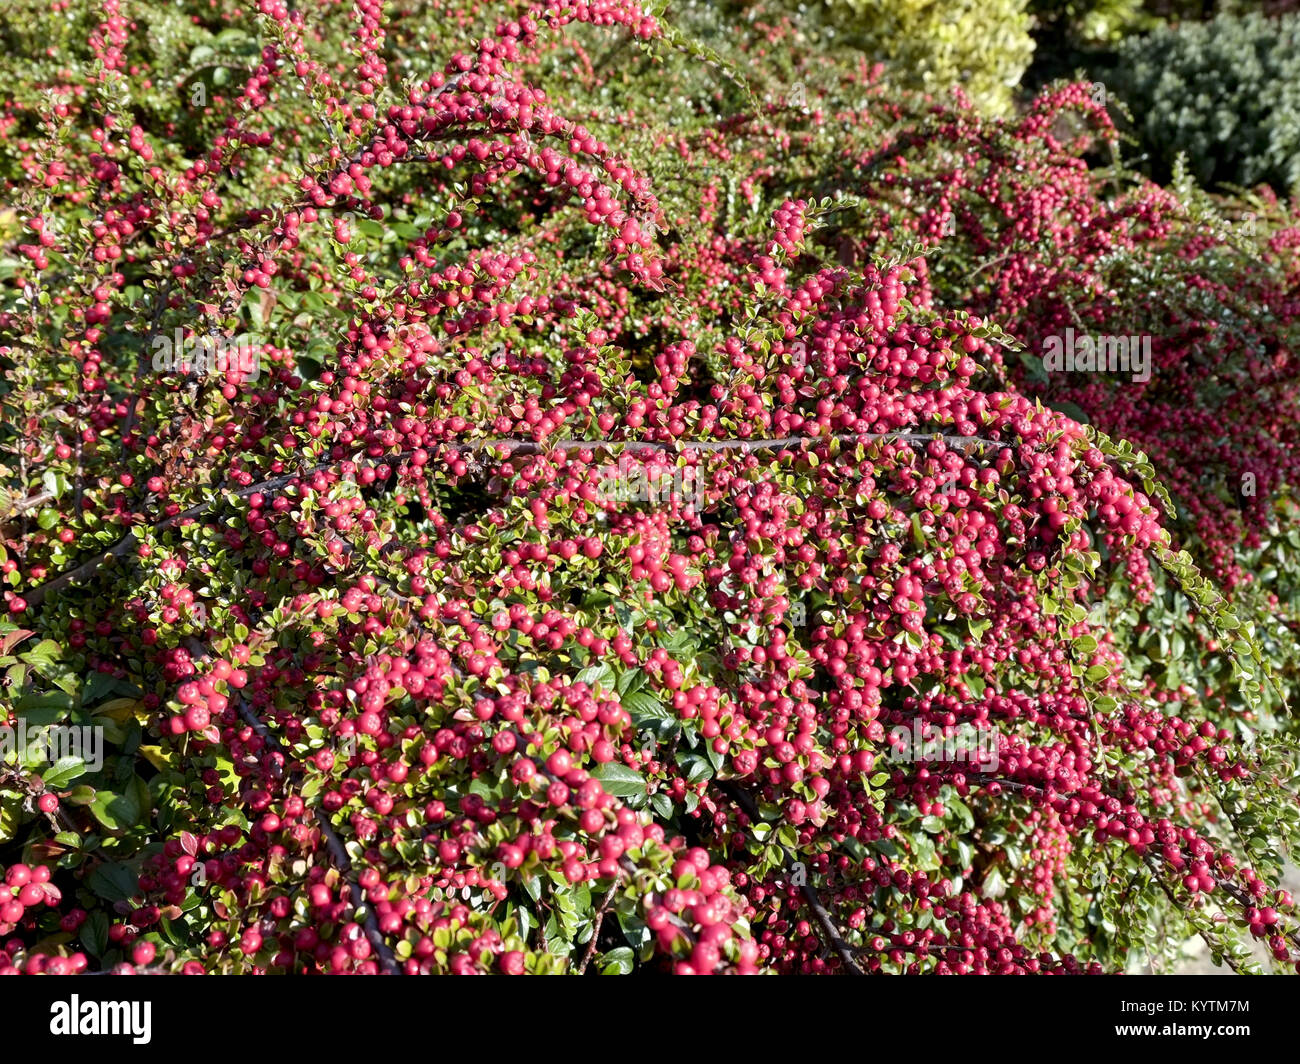 Decorative red Cotoneaster berries in autumn sunshine Stock Photo